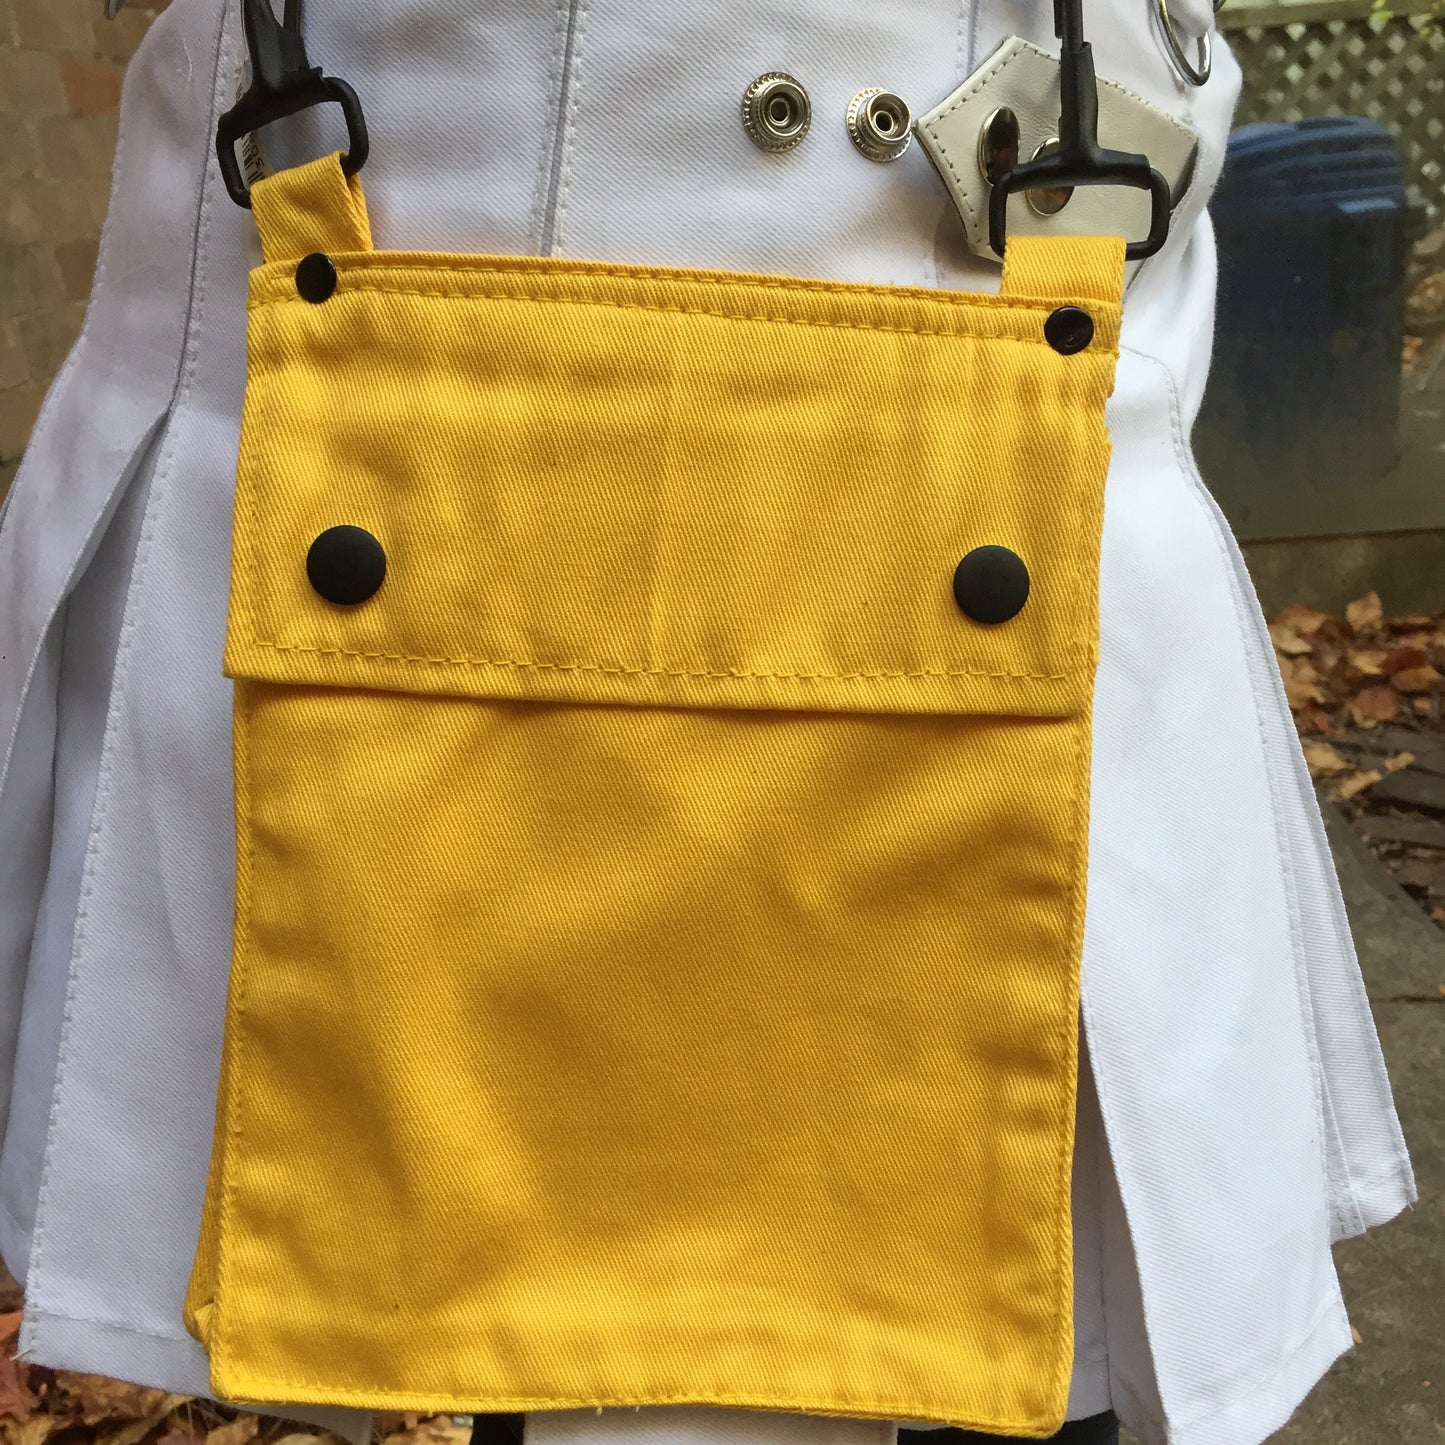 A model wearing the yellow Detachable Pocket for Heritage Kilt hooked to their kilt D-rings.